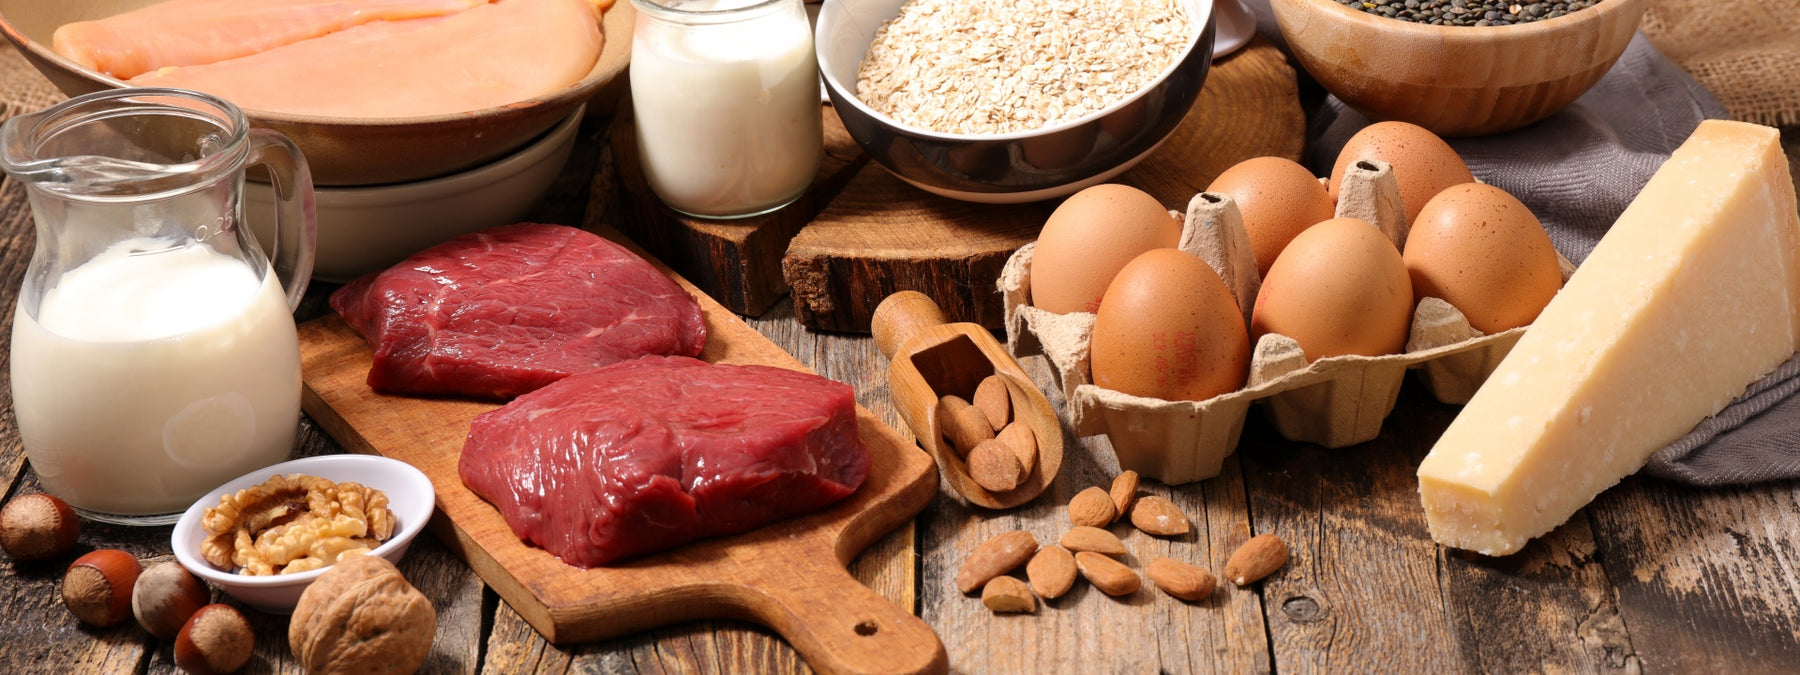 Up Your Intake! 10 Foods High in Protein